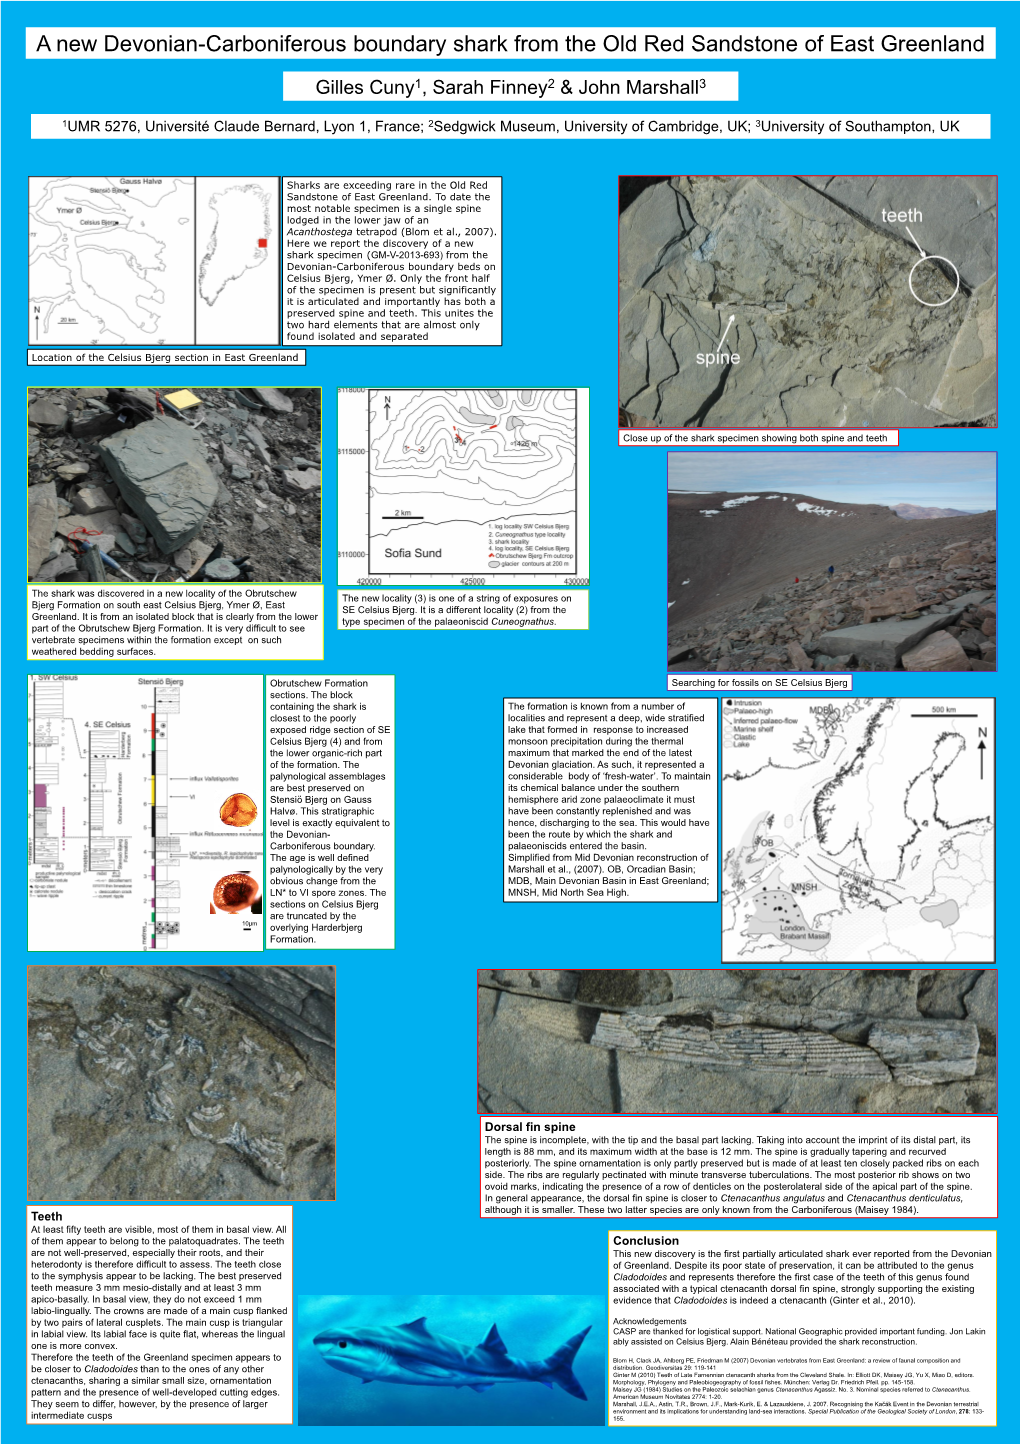 A New Devonian-Carboniferous Boundary Shark from the Old Red Sandstone of East Greenland